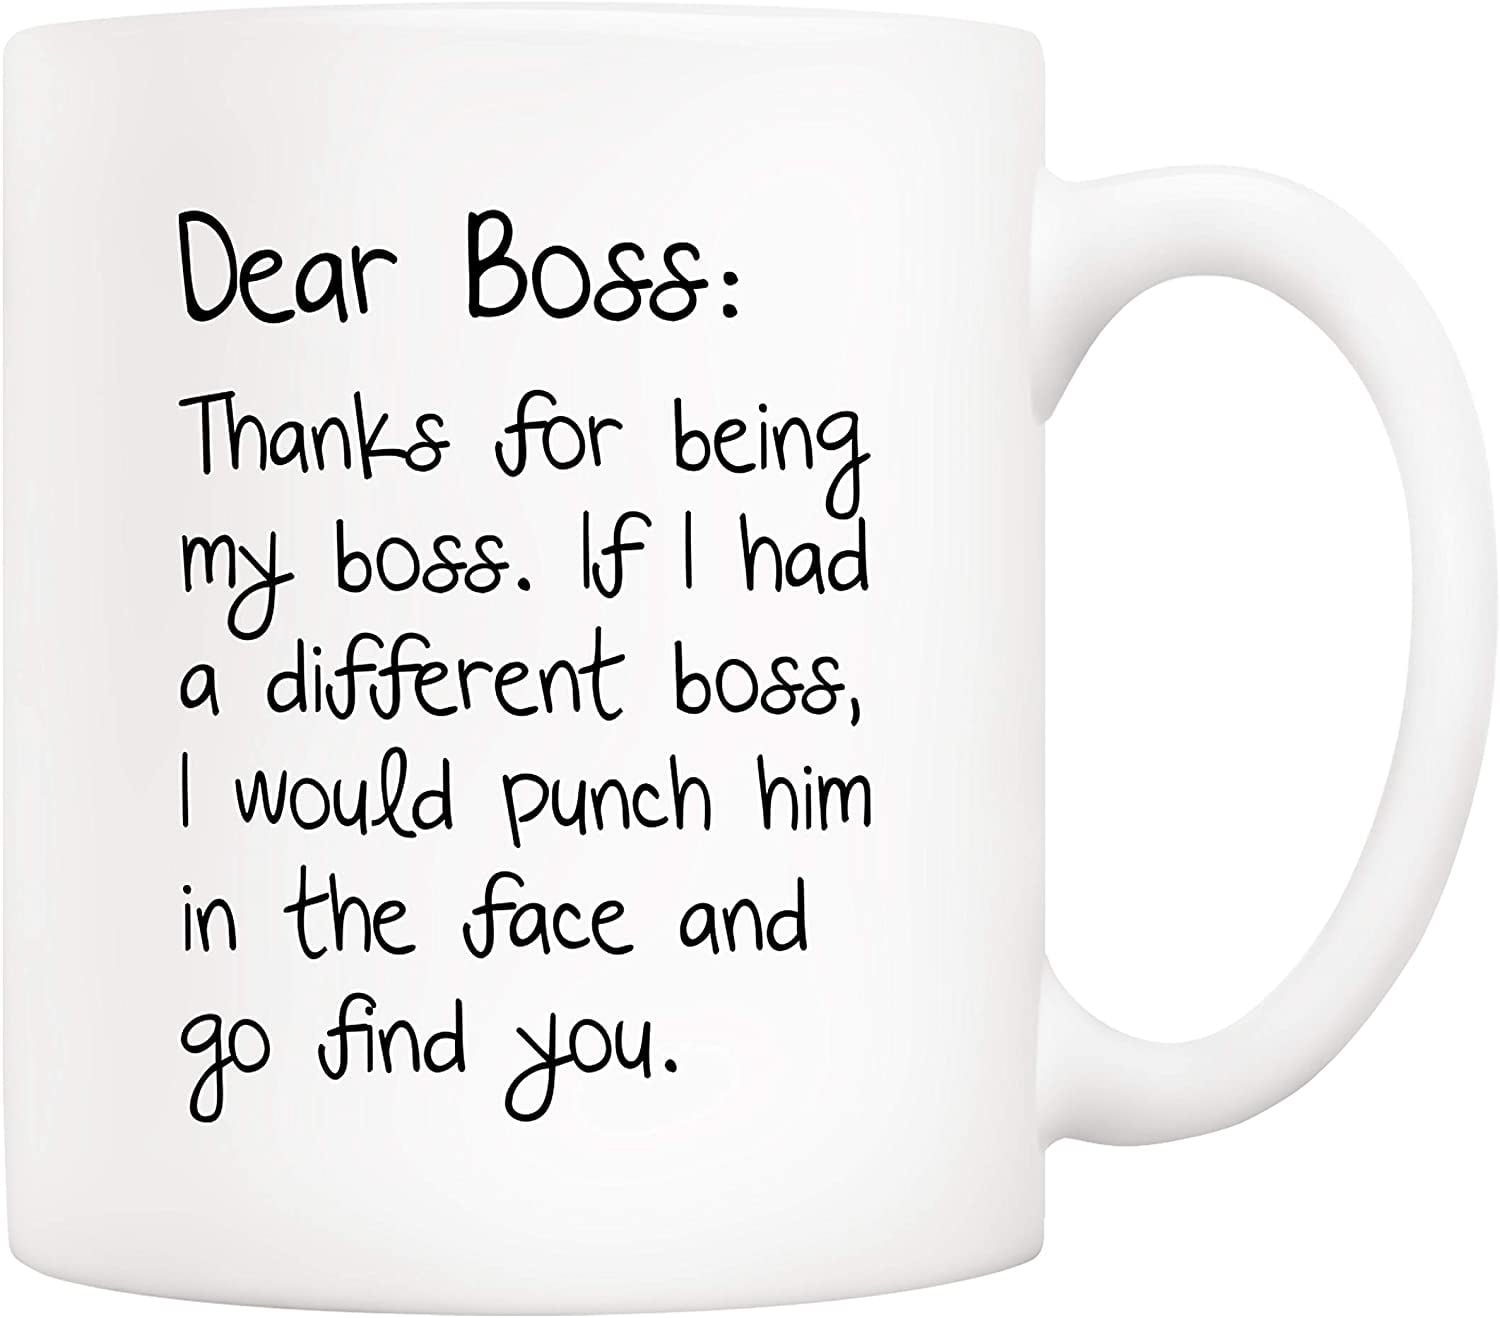 Soho Boss Gift Beer Mug for Men, 24oz Stainless Steel Insulated Tumbler Cup with Handle for Boss Day/Christmas/Appreciation/Office Coolest Boss Ever (